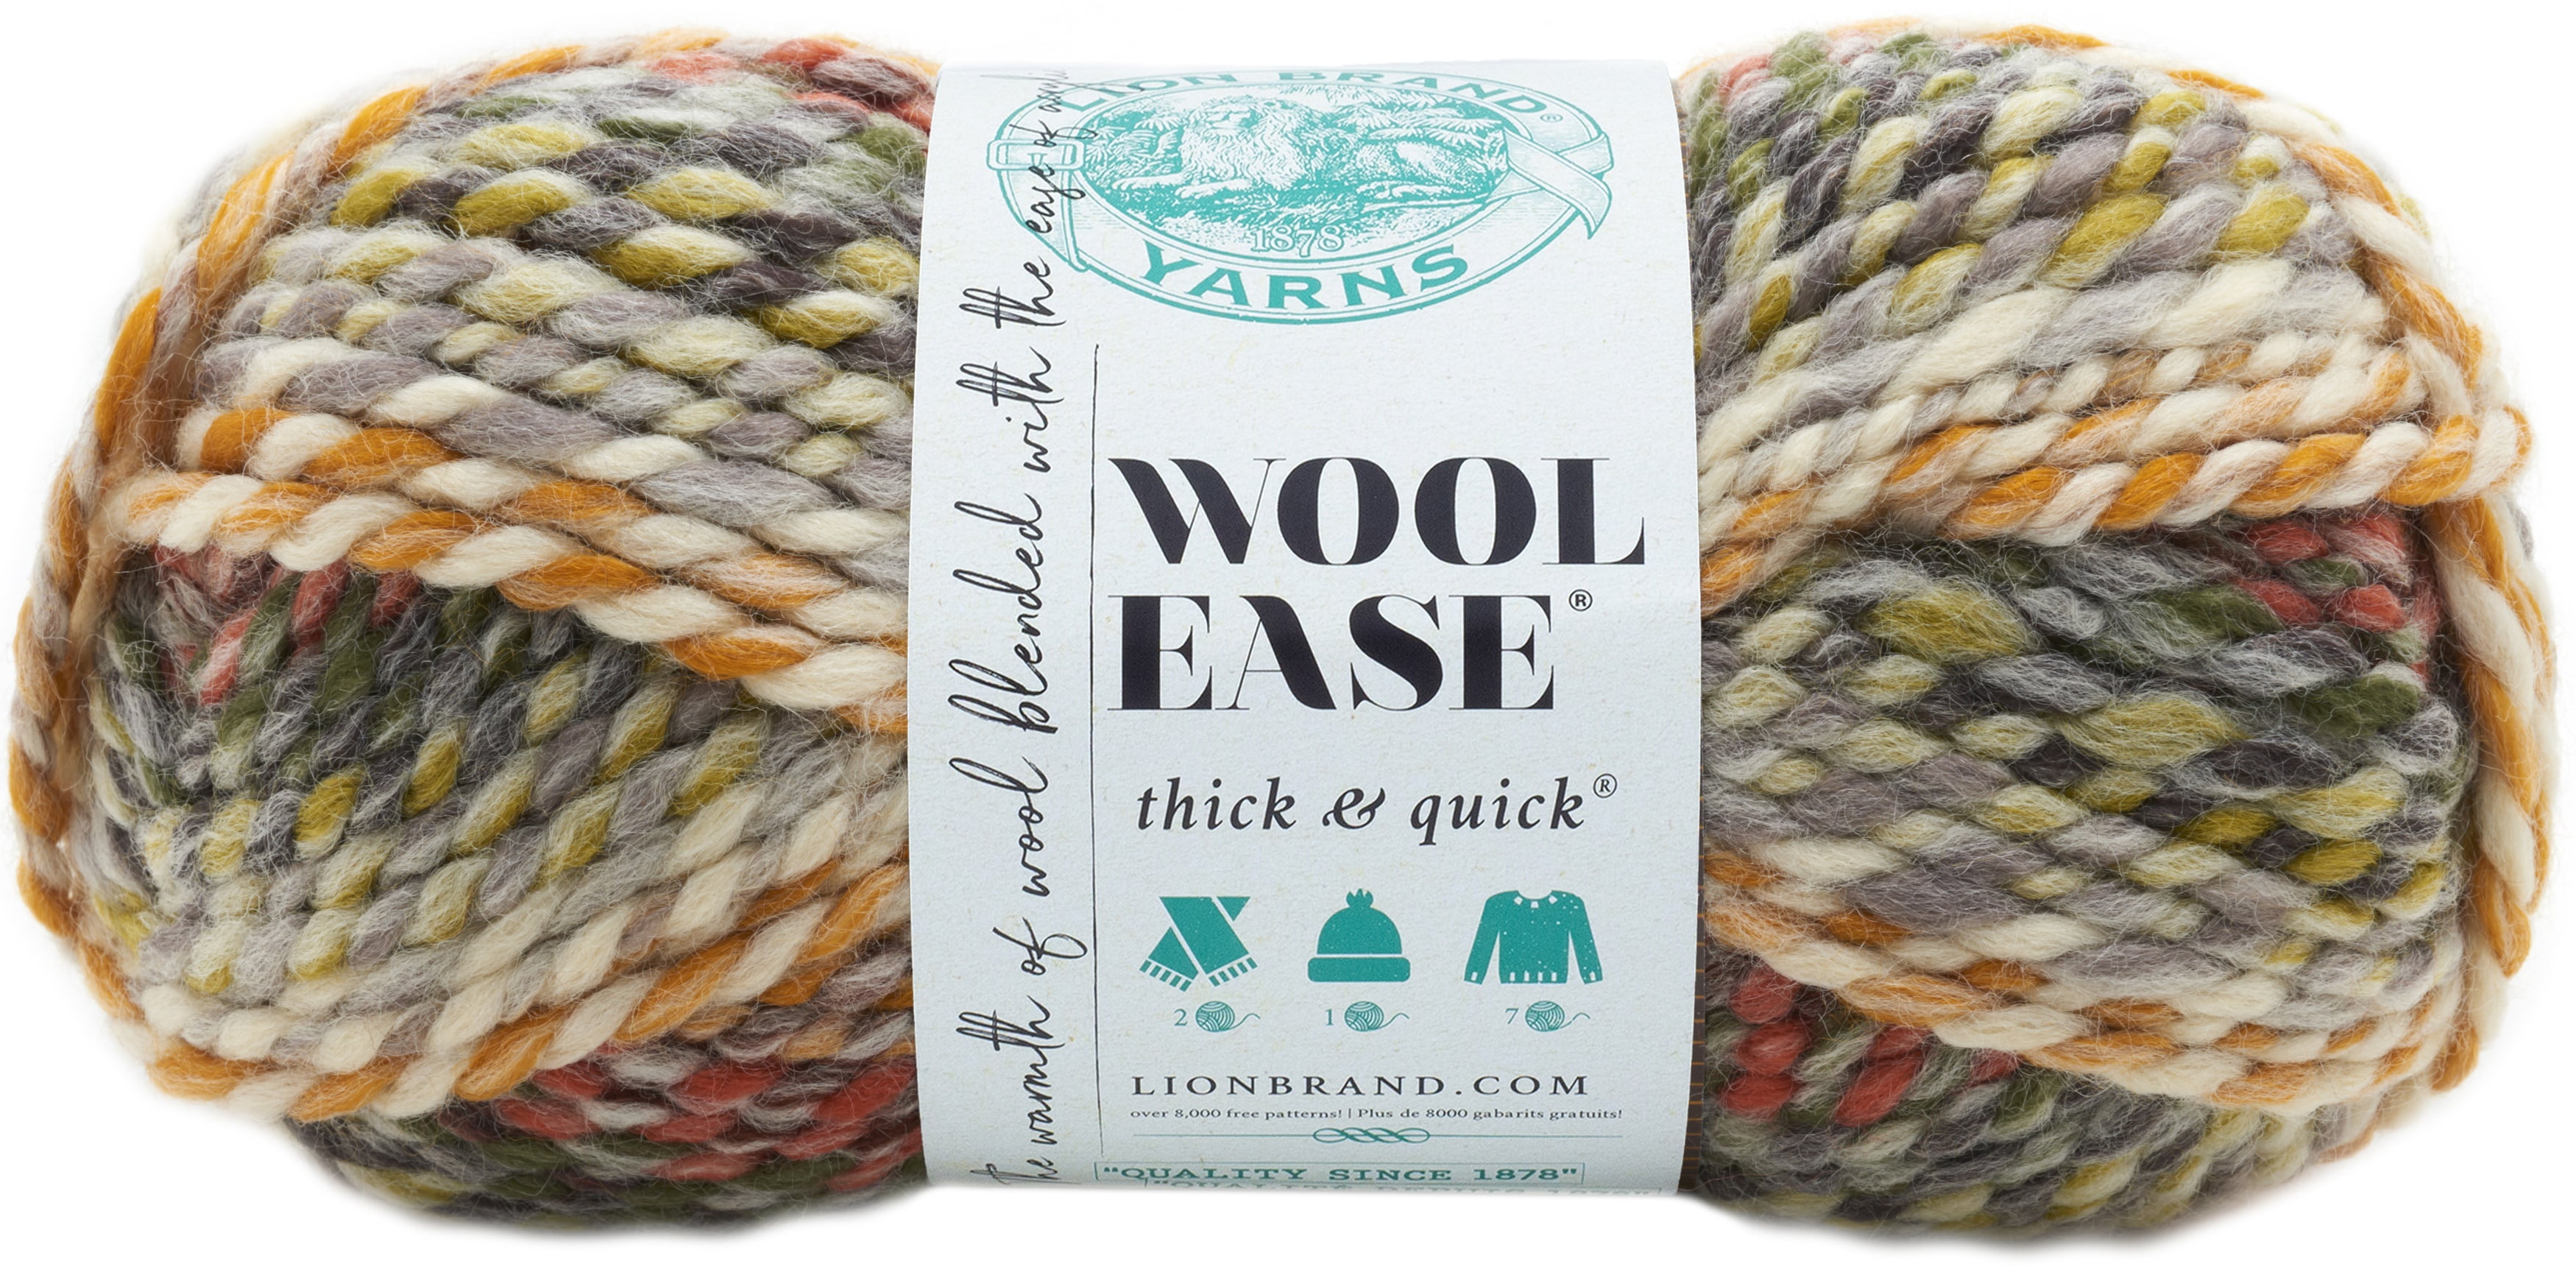 Lion Brand Wool-Ease Thick & Quick Yarn-Marble Stripes, 1 count - Harris  Teeter